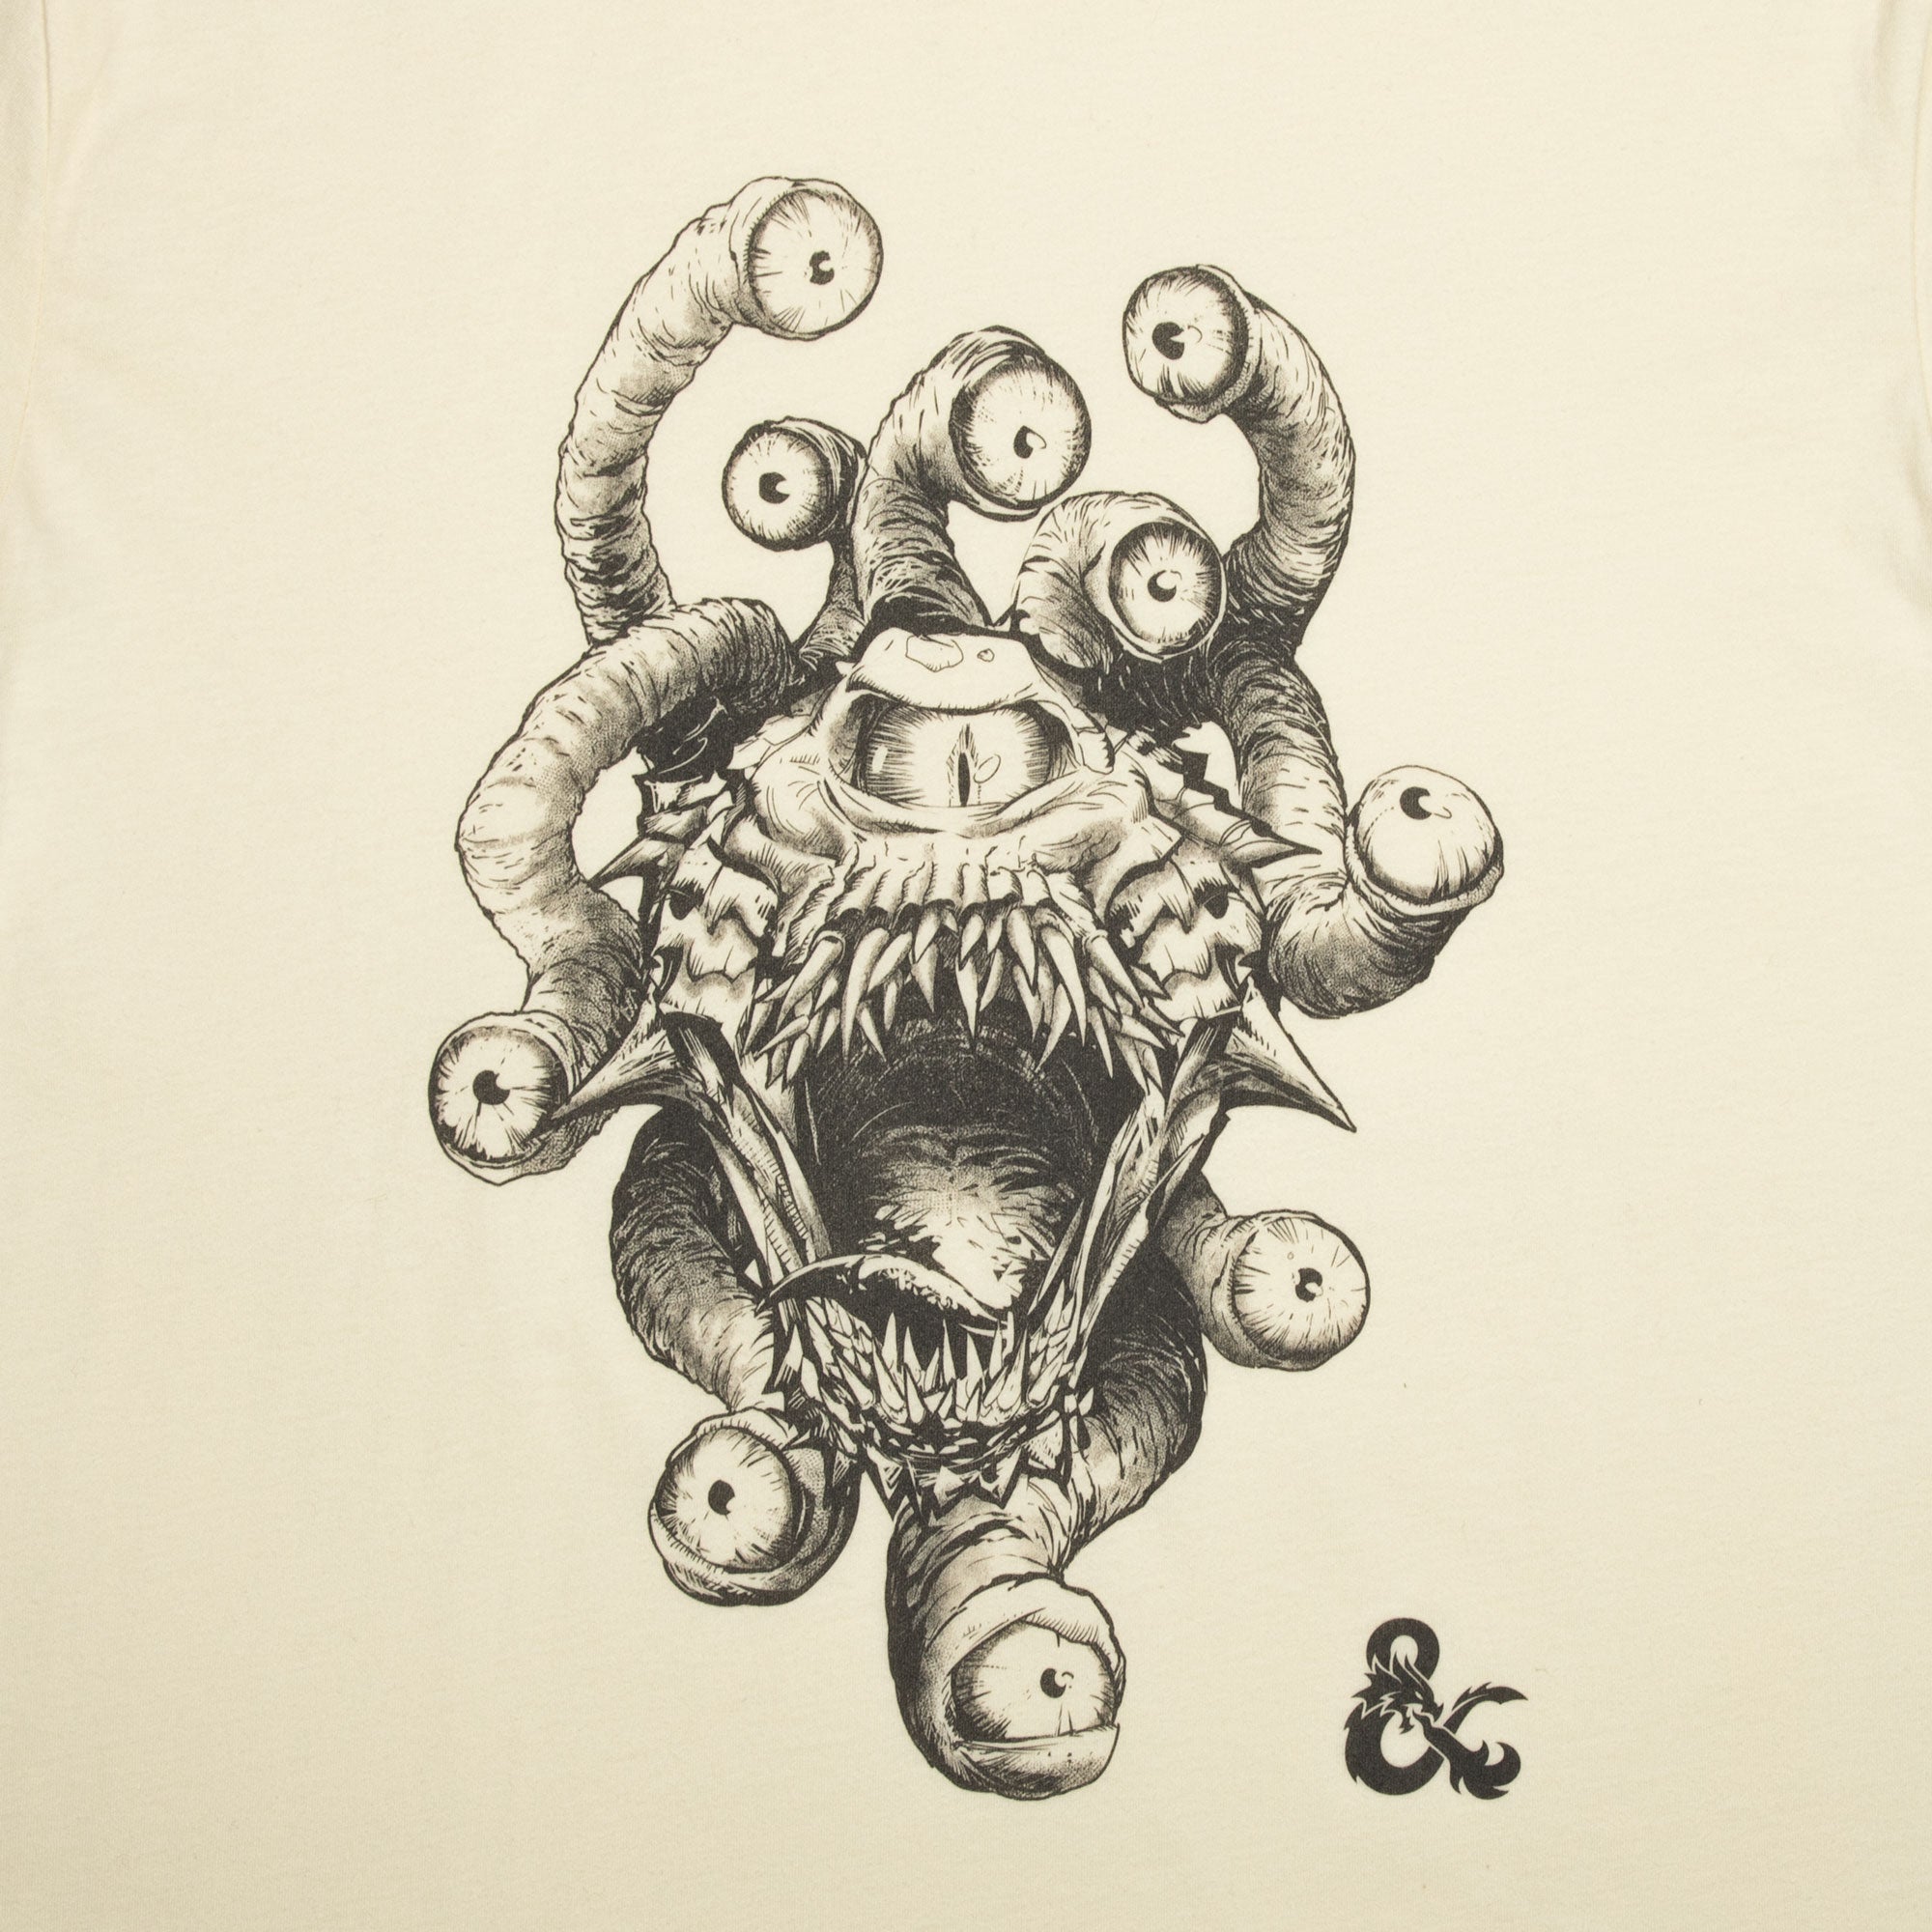 The Beholder Natural Tee